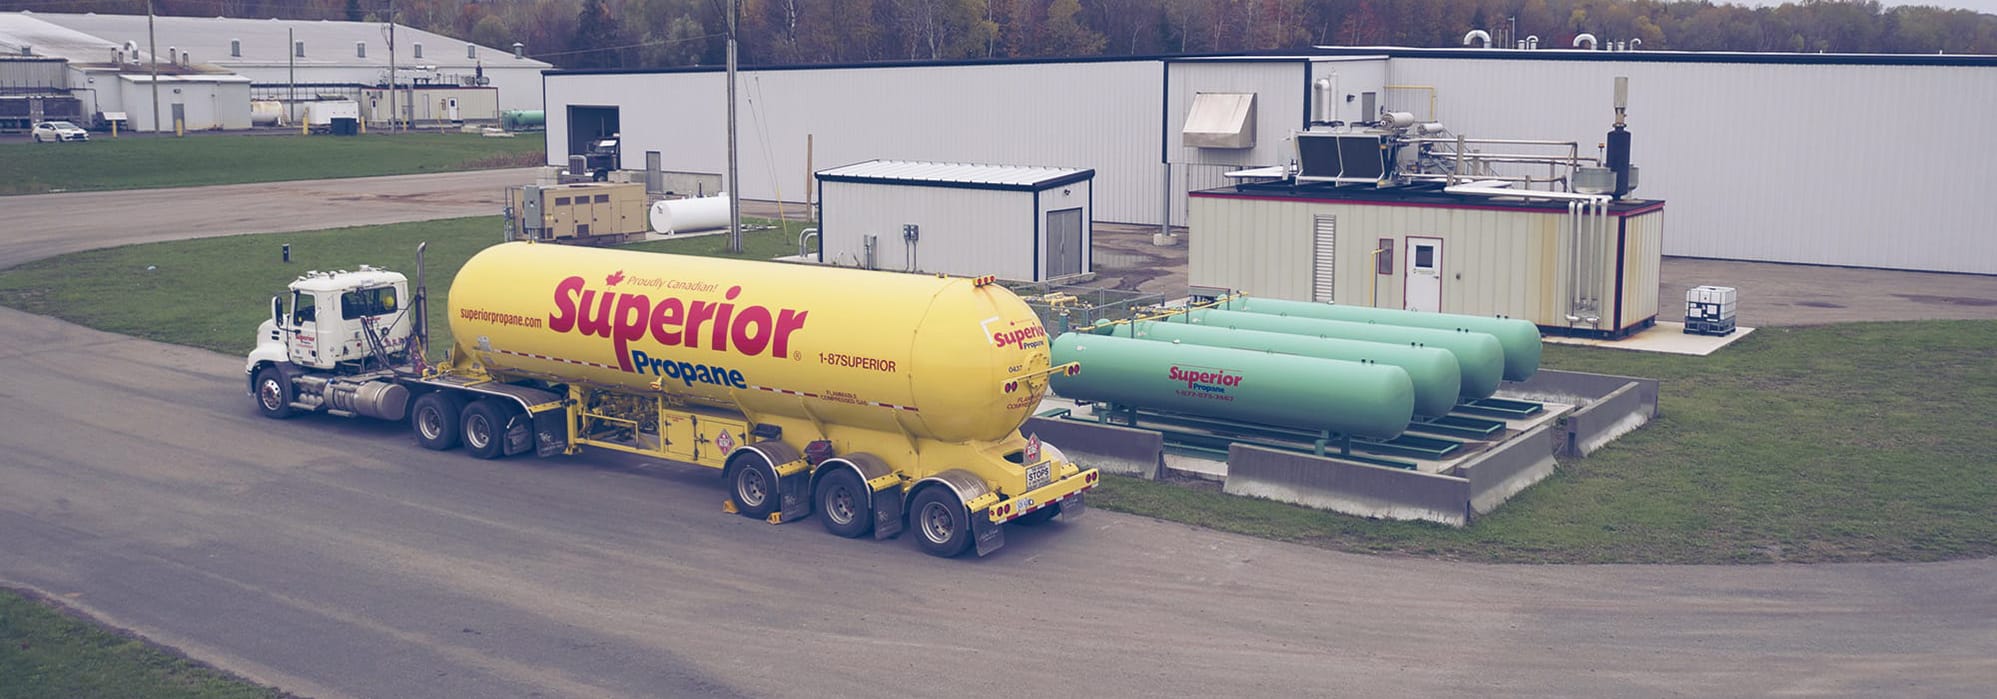 A Superior Propane truck delivering fuel to be used for combined heat and power generation at Sharon Mushroom Farm in Sharon, Ontario.